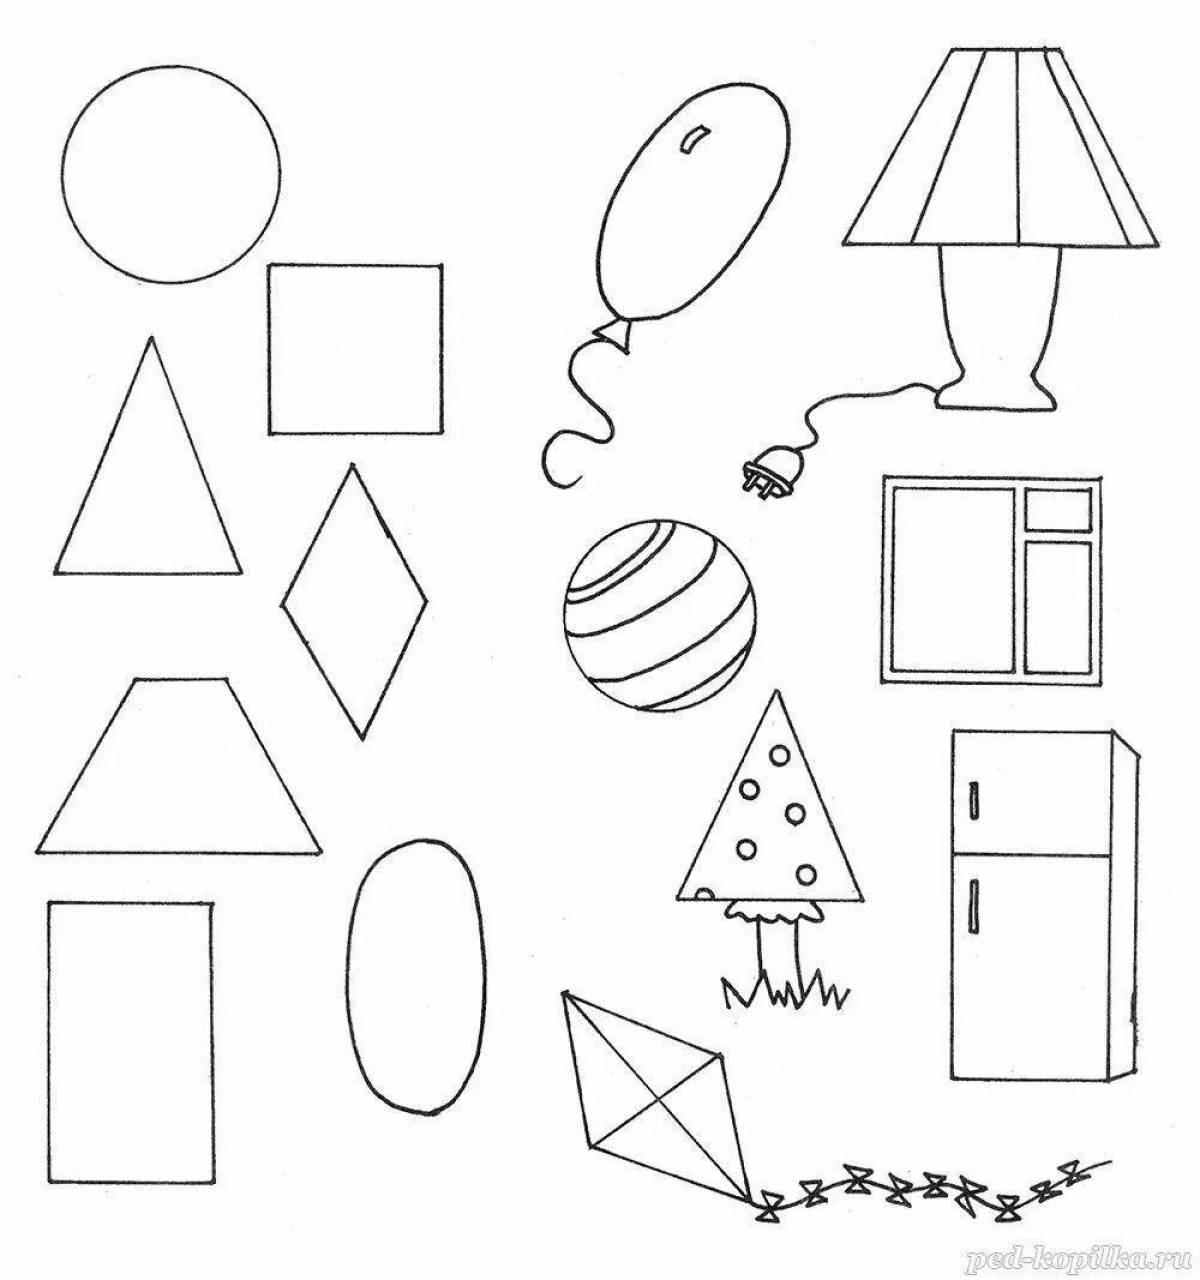 A fun coloring book of geometric shapes for 2-3 year olds